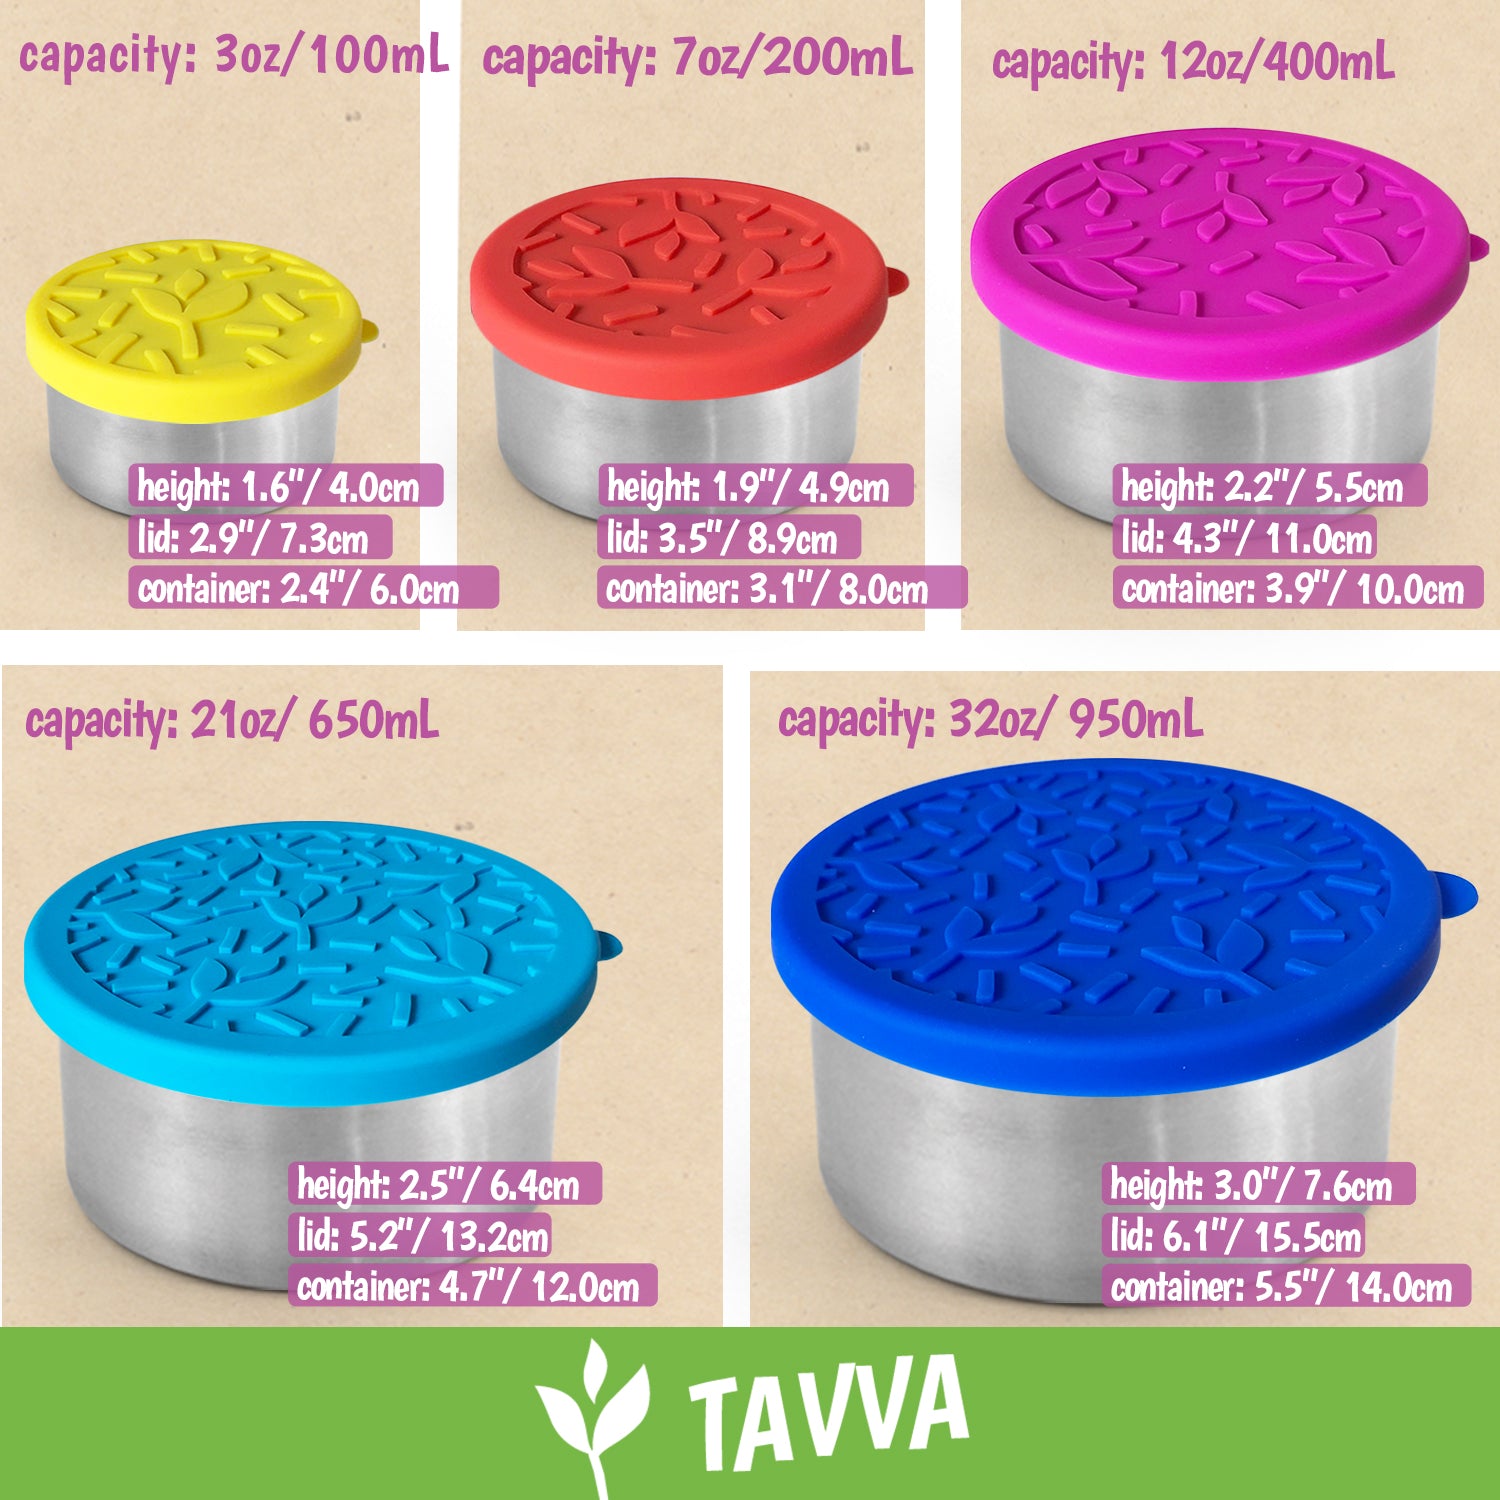 TAVVA Stainless Steel Snack Containers for Kids (12oz/7oz/3oz) - Kids Lunch  Containers for School, Containers with Lids, Stainless Steel Lunch